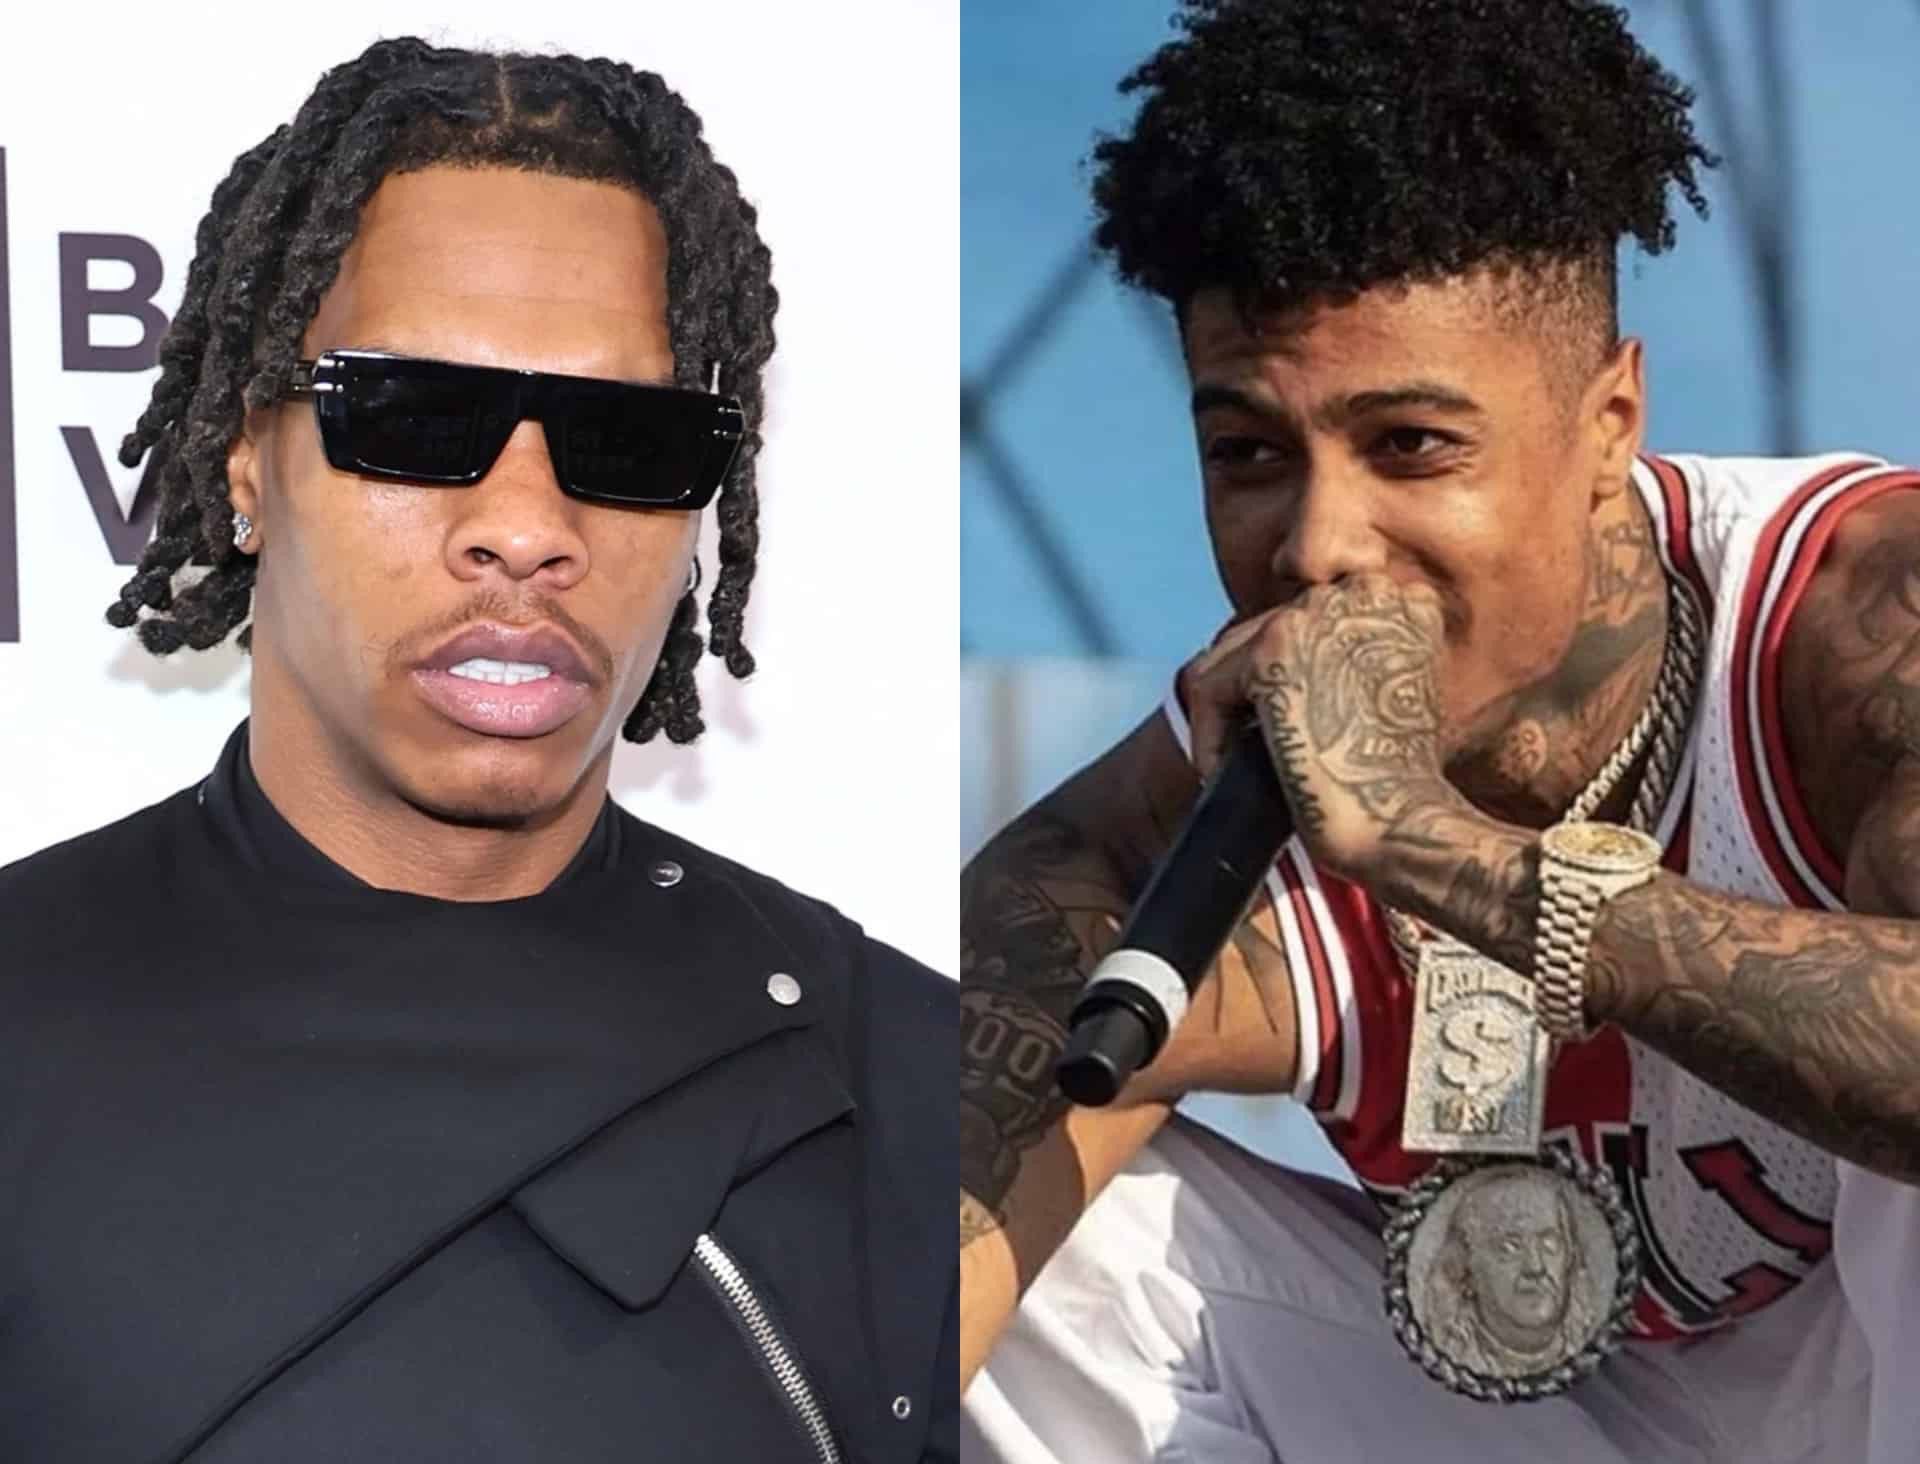 Blueface Disses Lil Baby On His New Track "Baby Momma Drama"